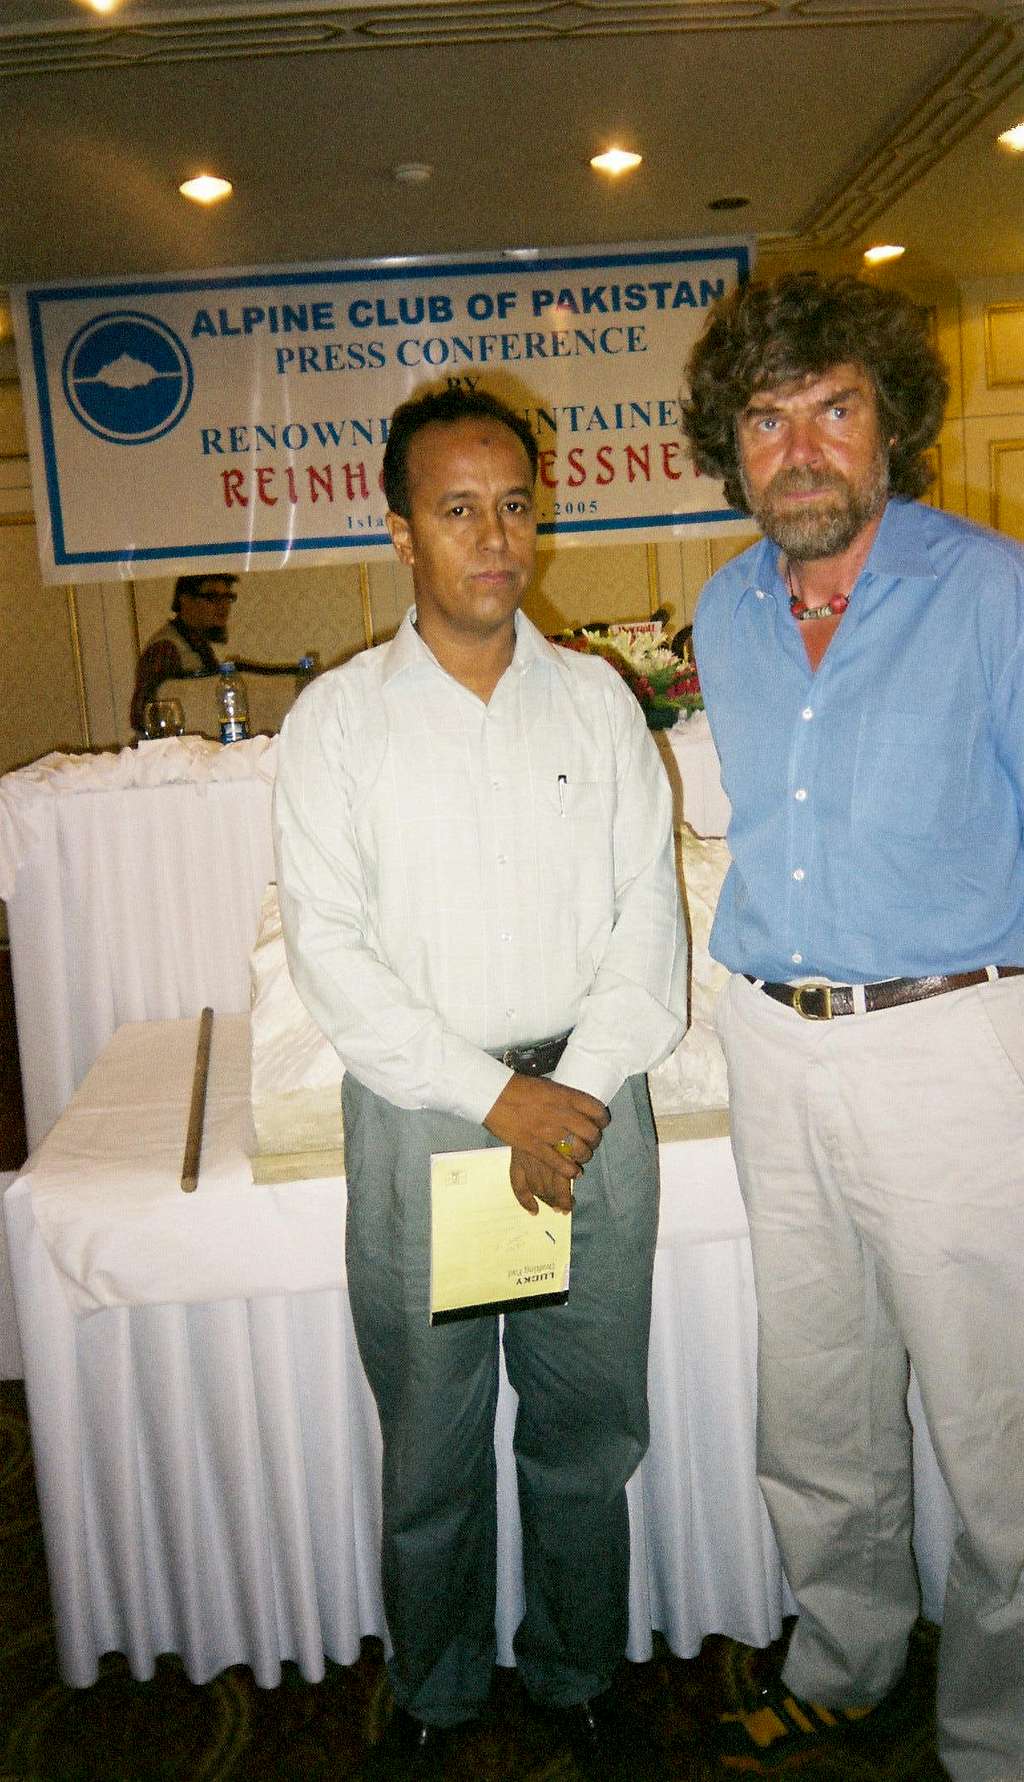 With Reinhold Messner